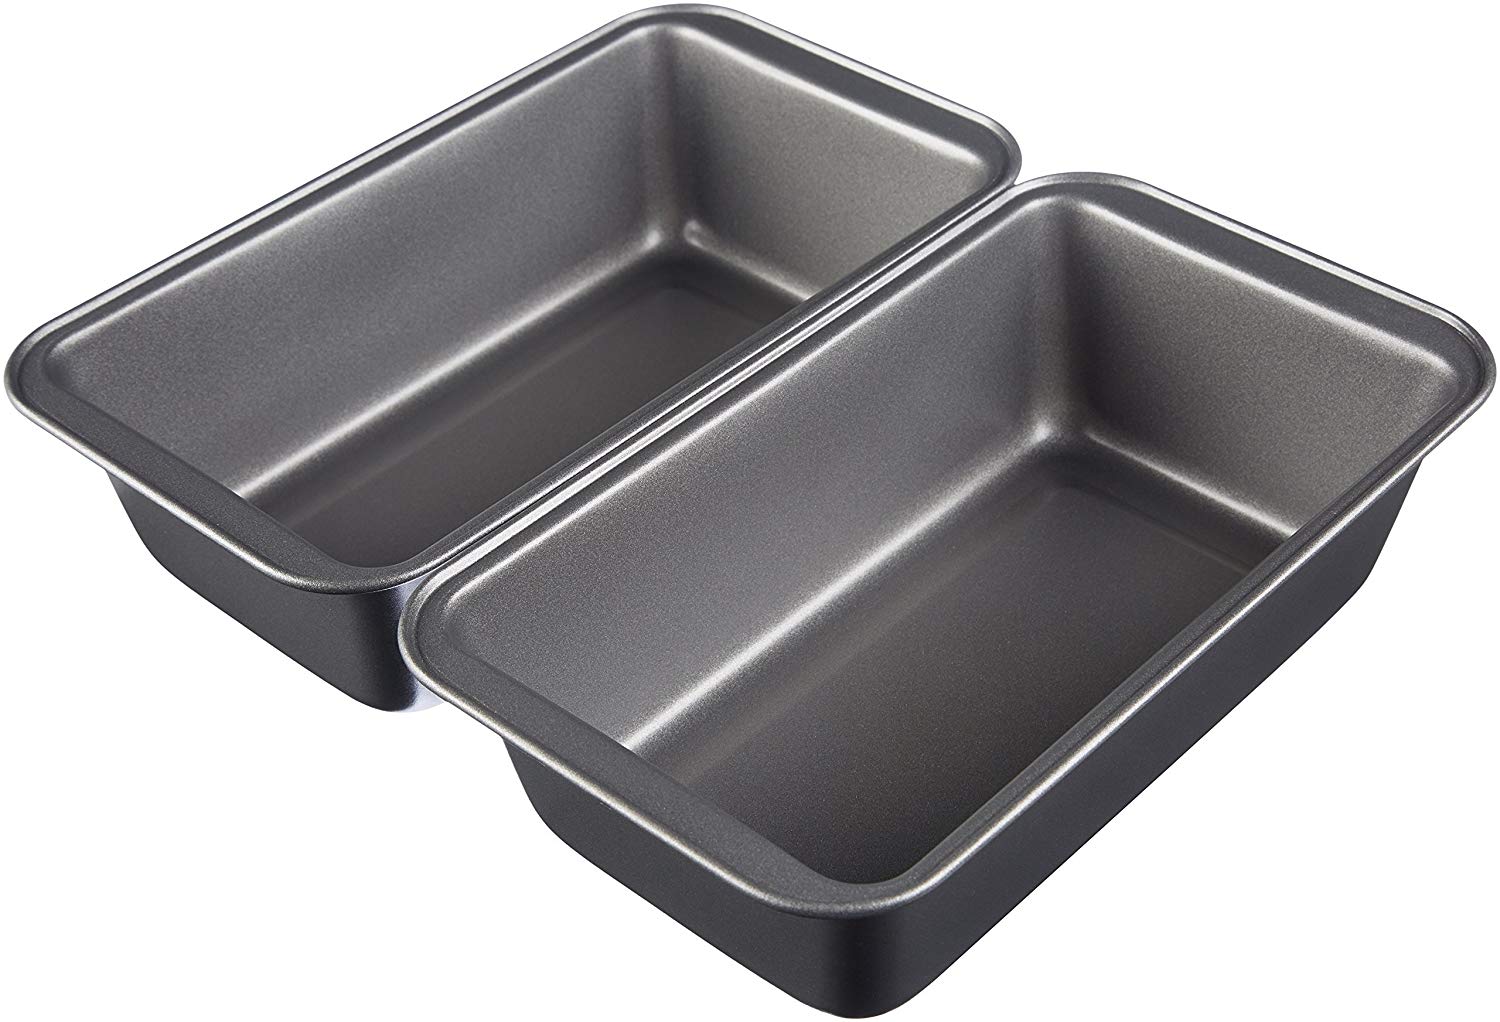 AmazonBasics Nonstick Carbon Steel Bread And Loaf Pan, 2-Piece